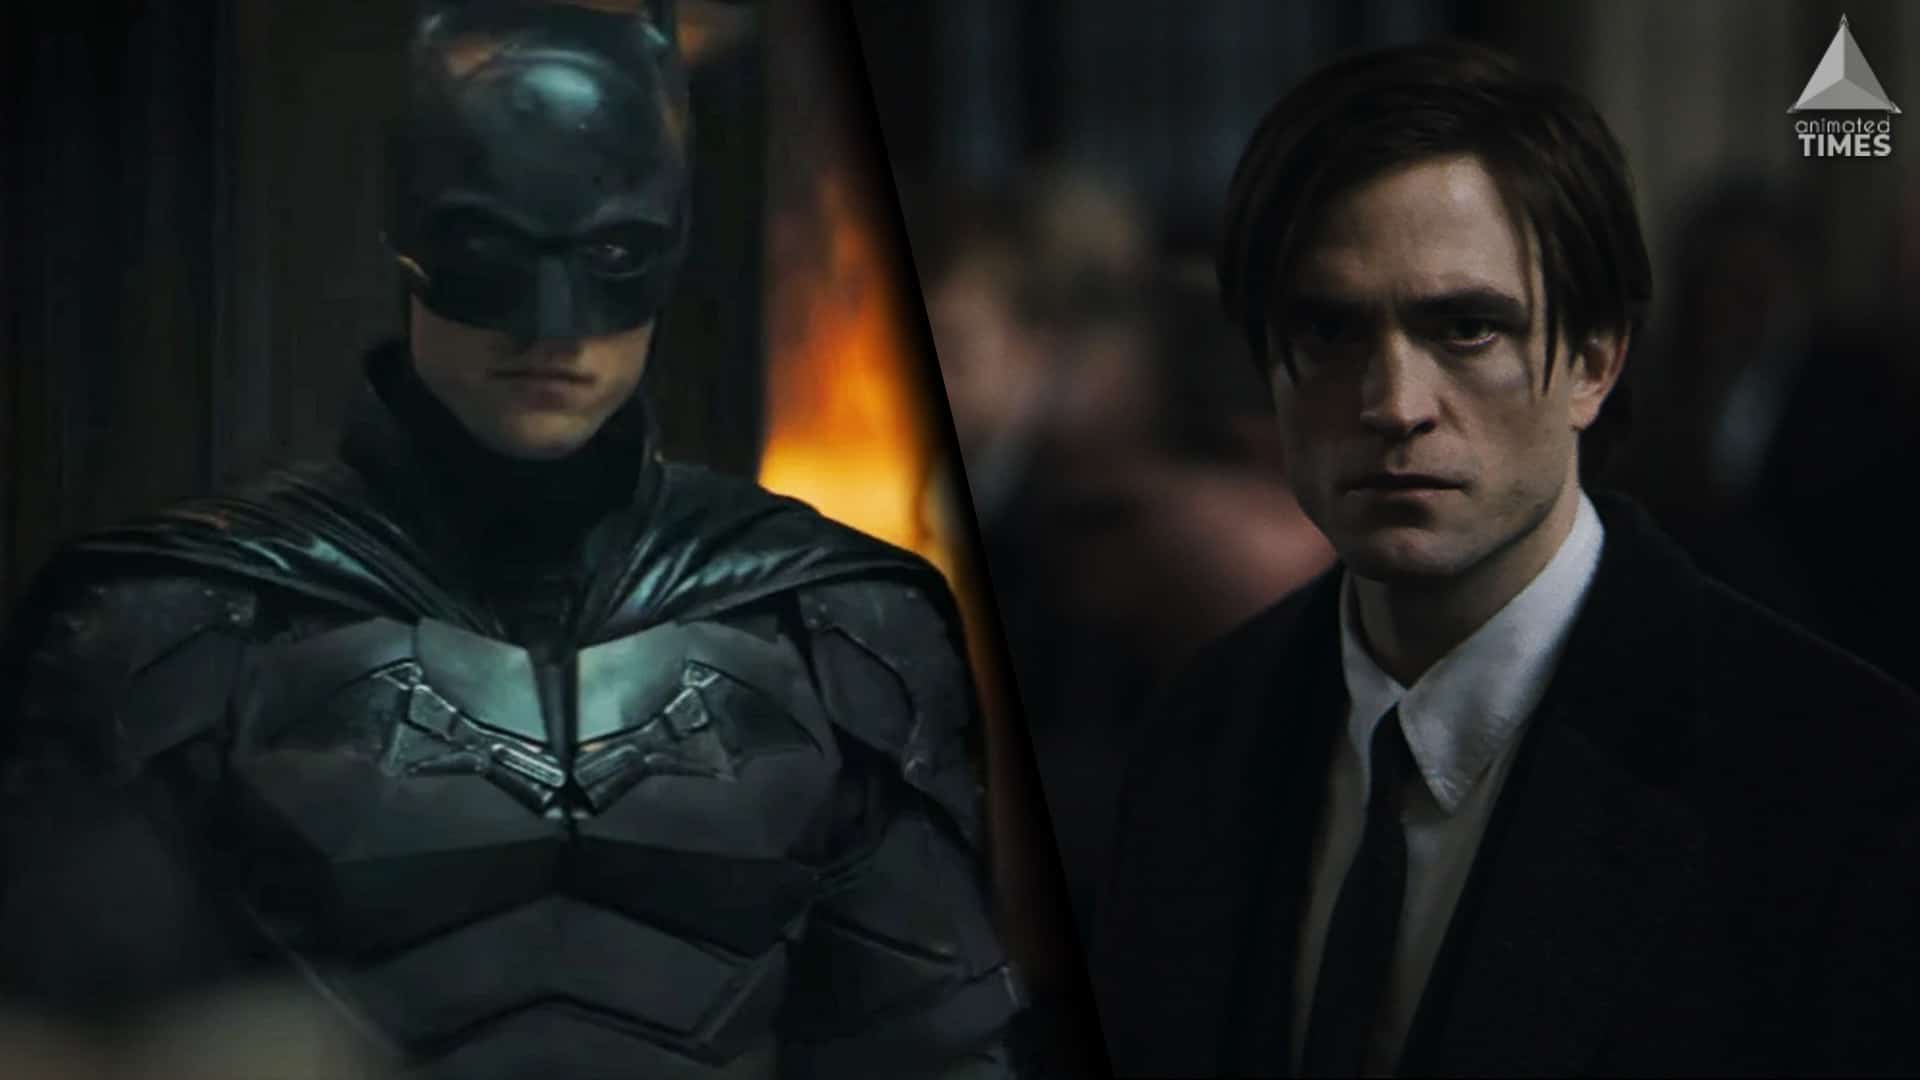 The Batman Trailer: 5 Reasons We Are Excited (& 5 That Worry Us)